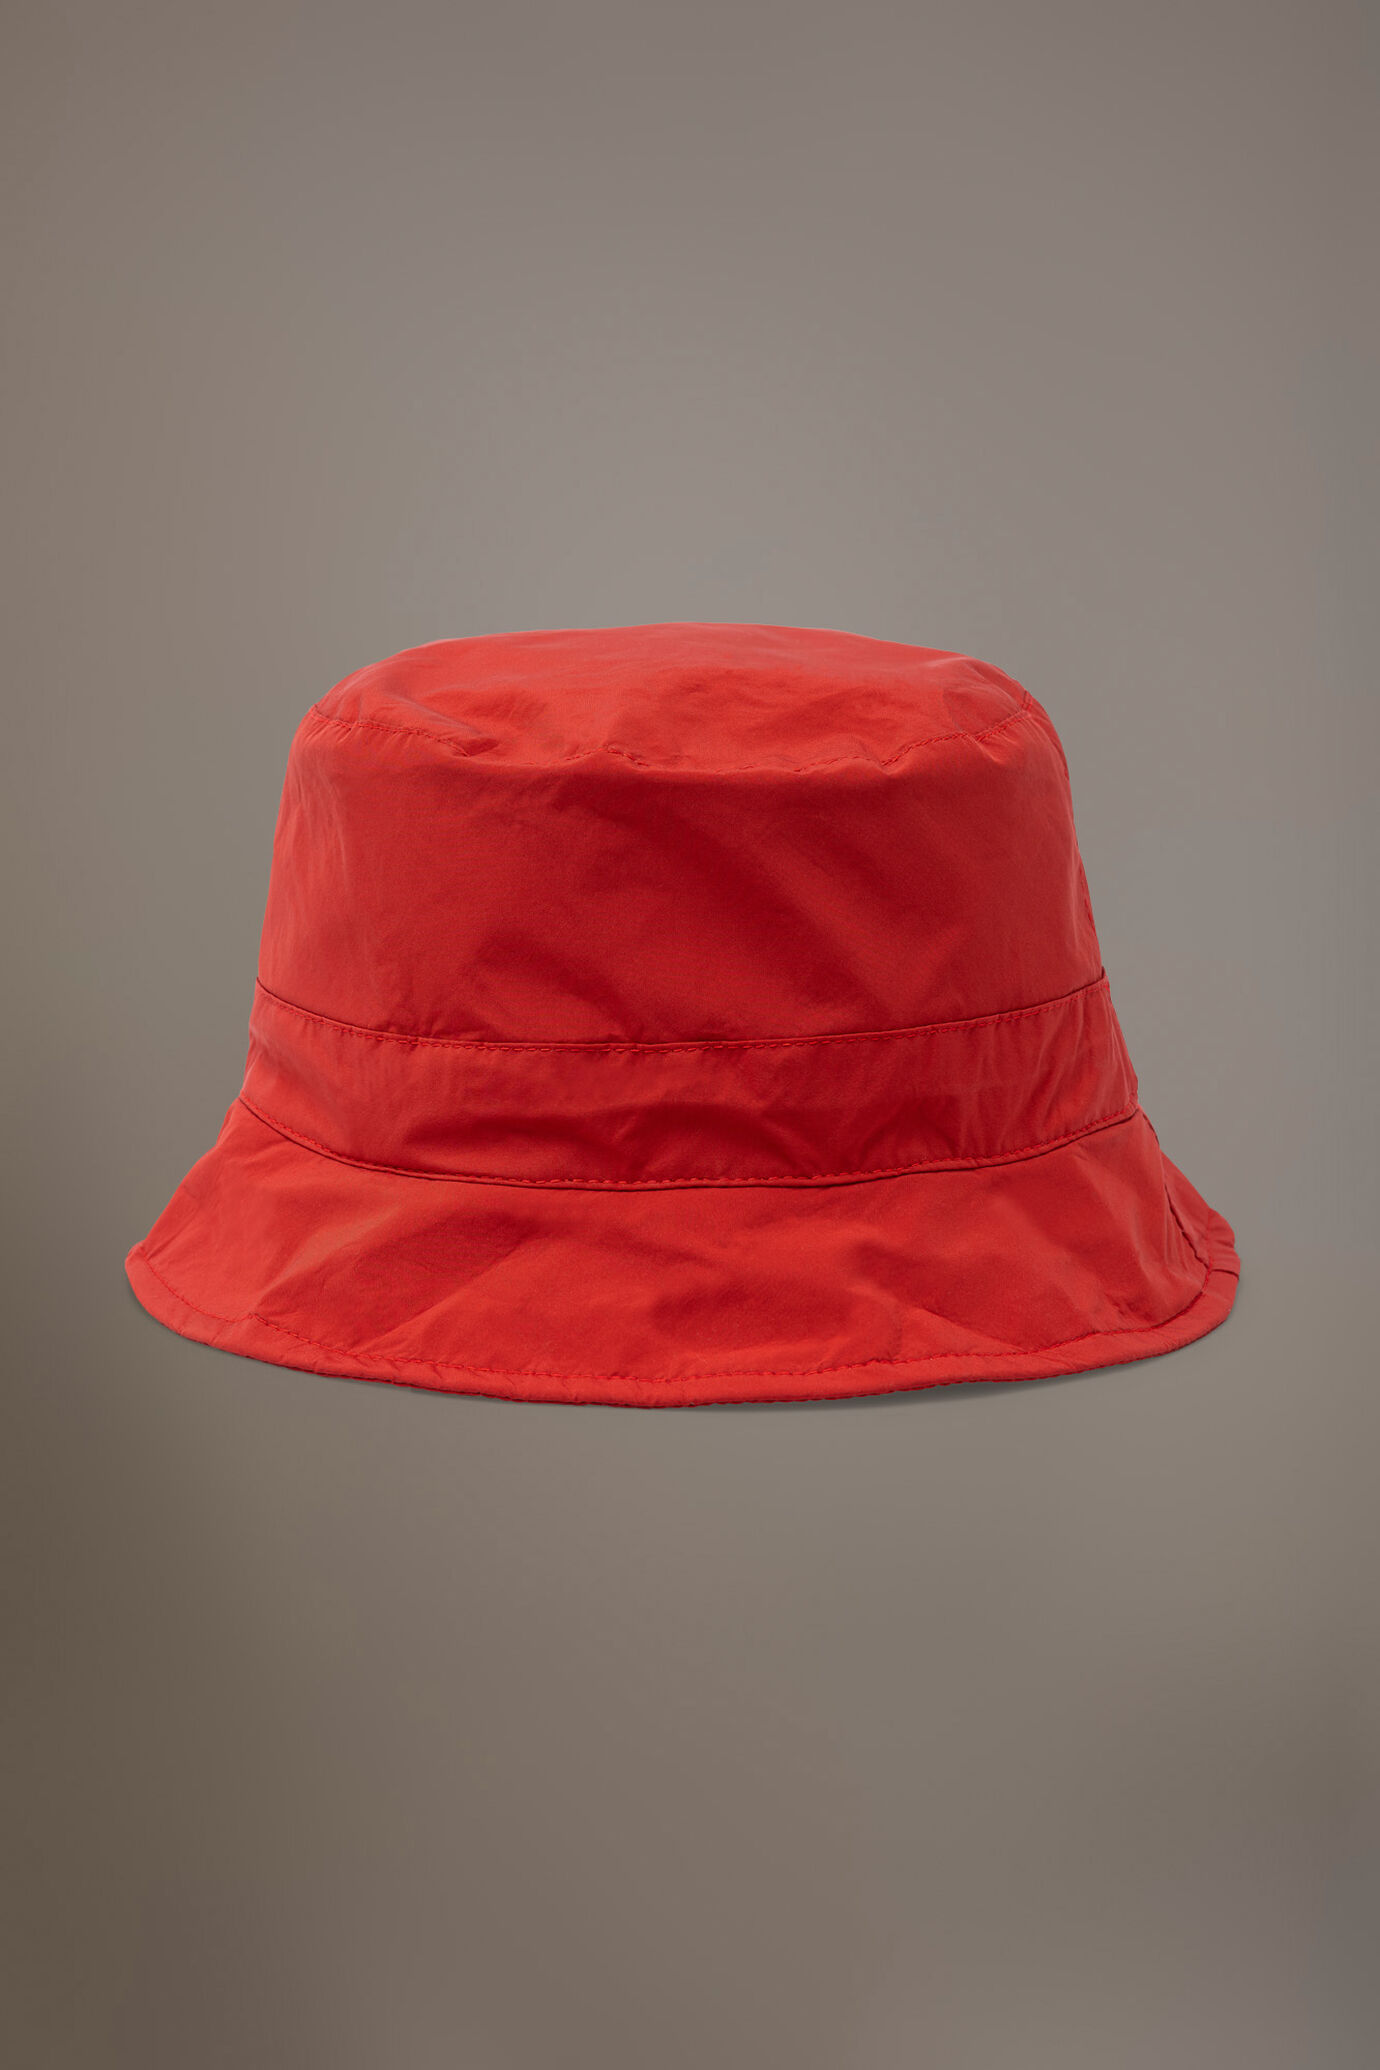 Packable fisherman hat made with waterproof fabric